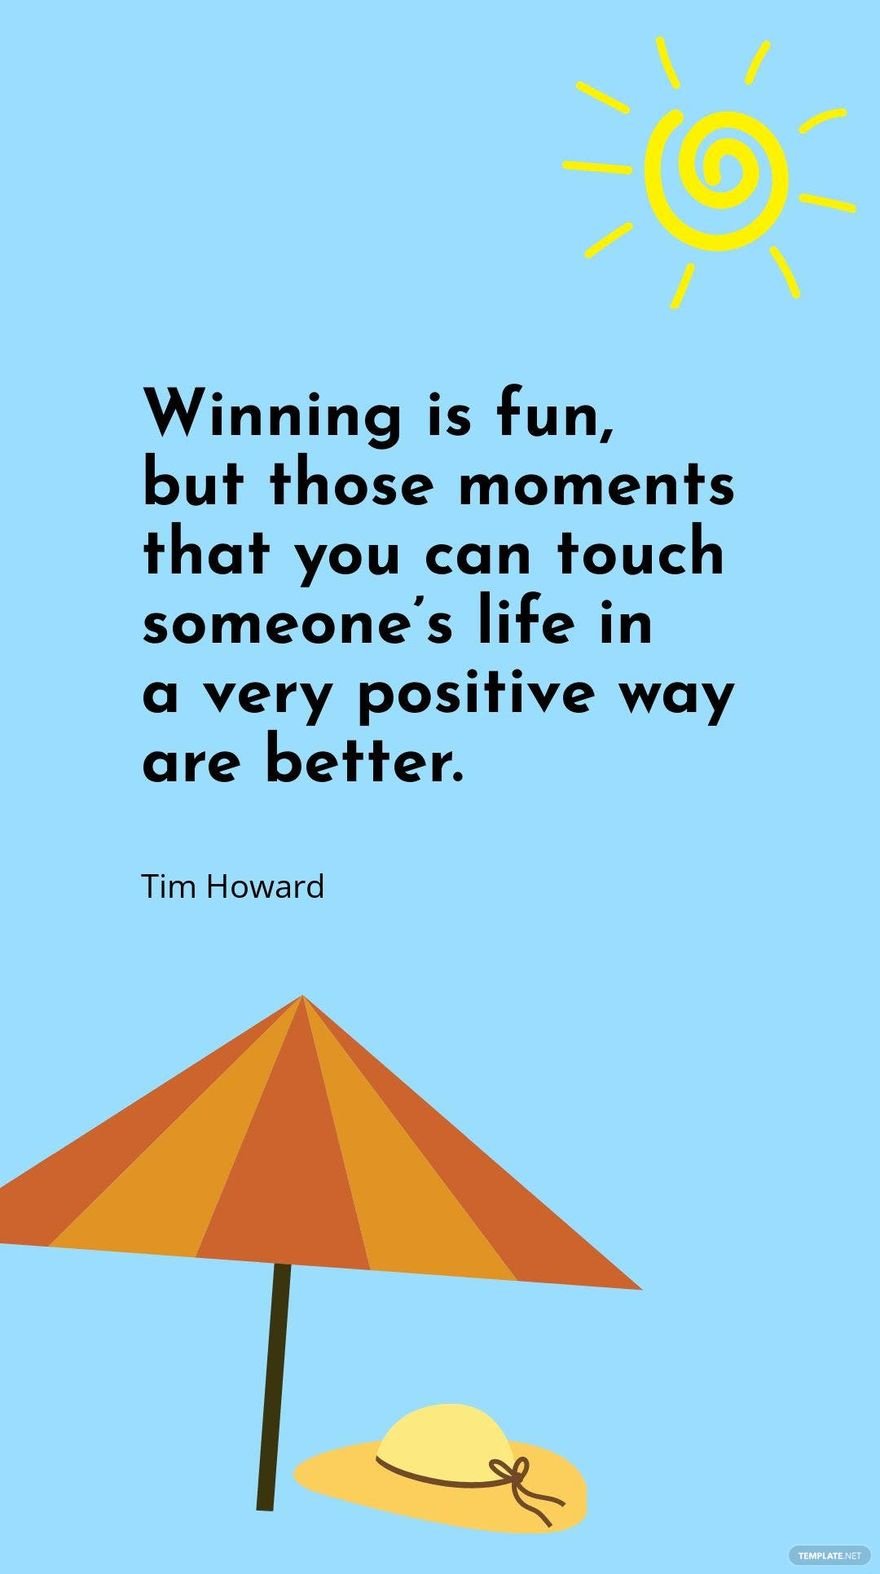 Tim Howard - Winning is fun, but those moments that you can touch someone’s life in a very positive way are better.